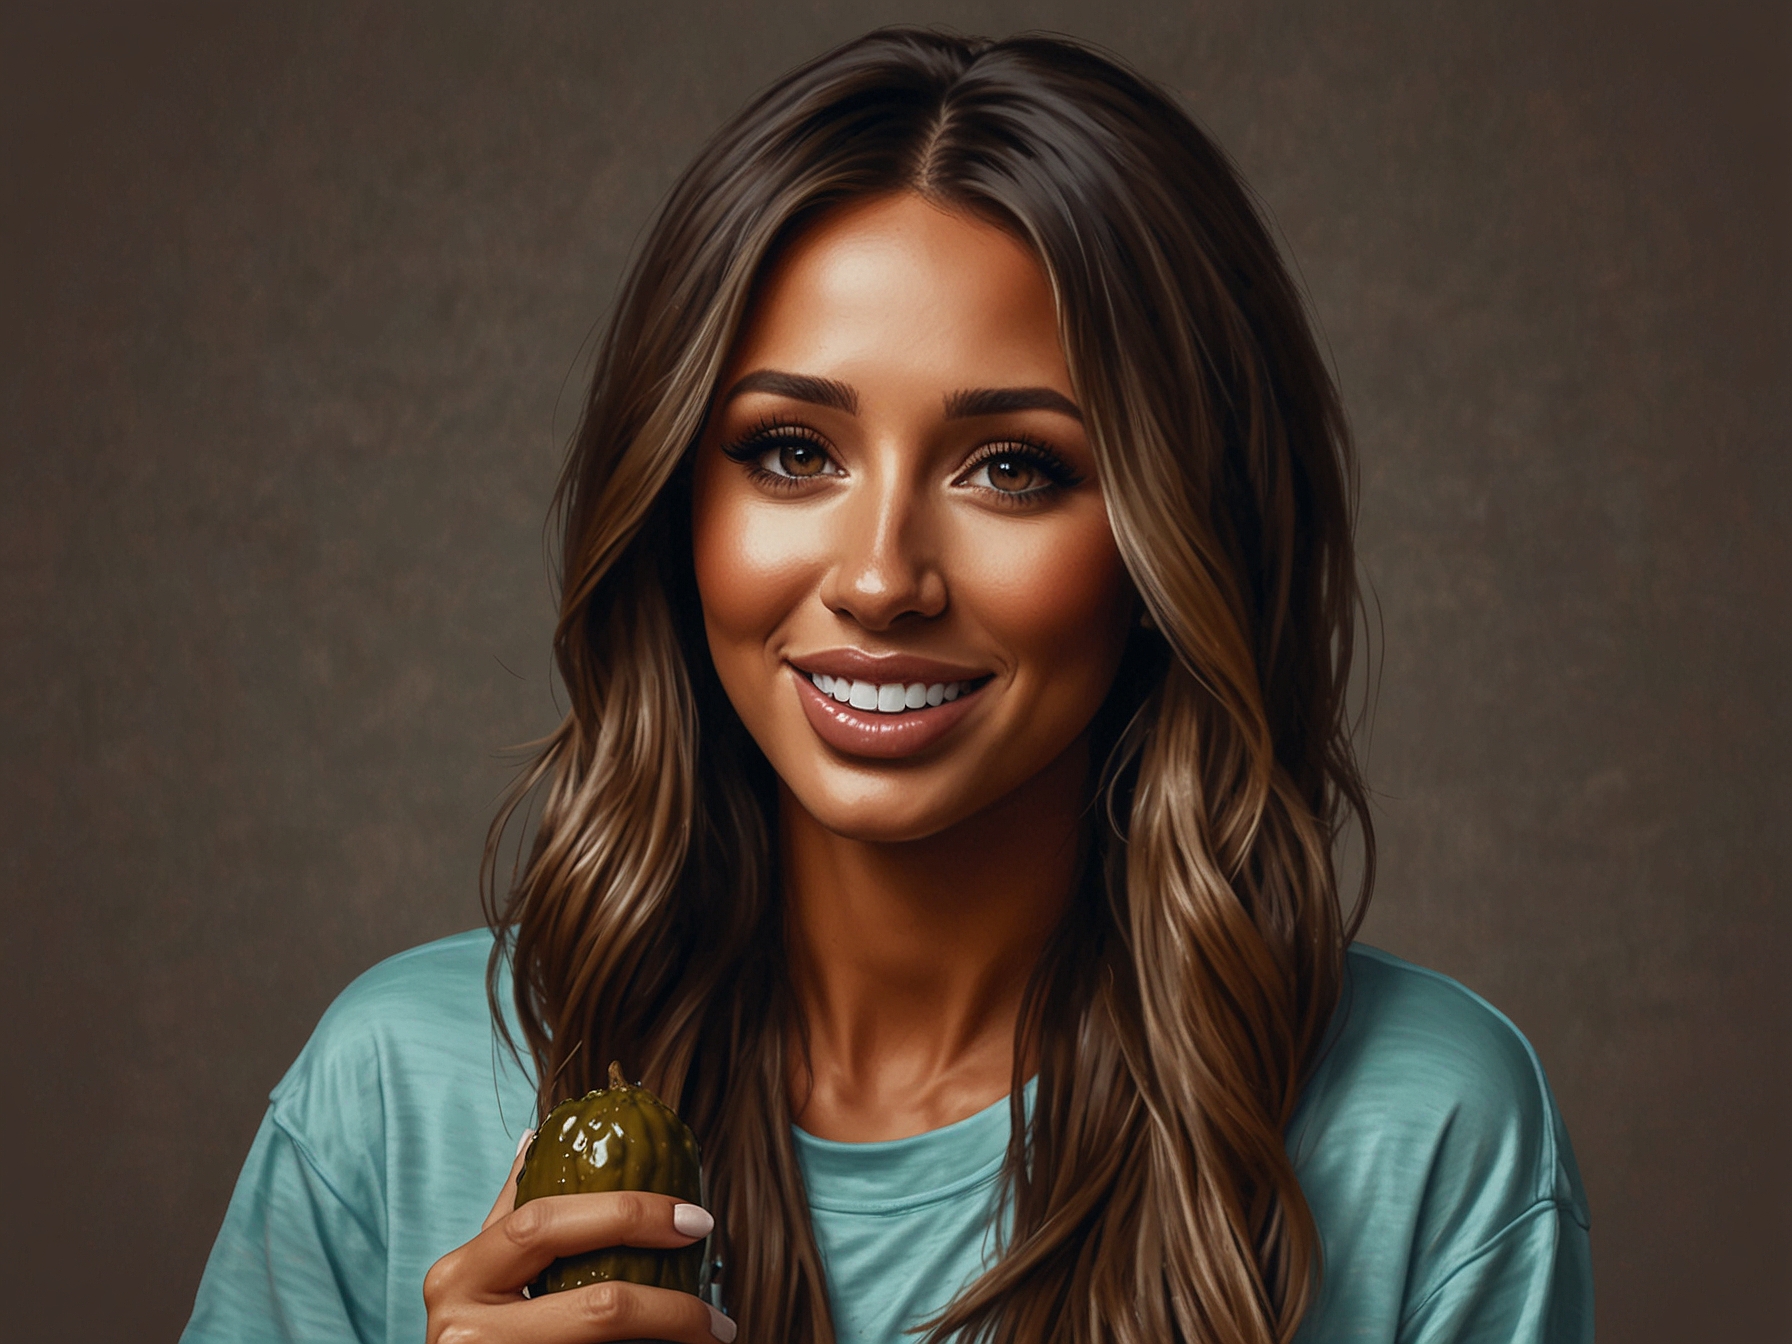 Megan McKenna holding a pickle dipped in chocolate sauce, sharing her bizarre pregnancy craving with a playful expression on her Instagram video.